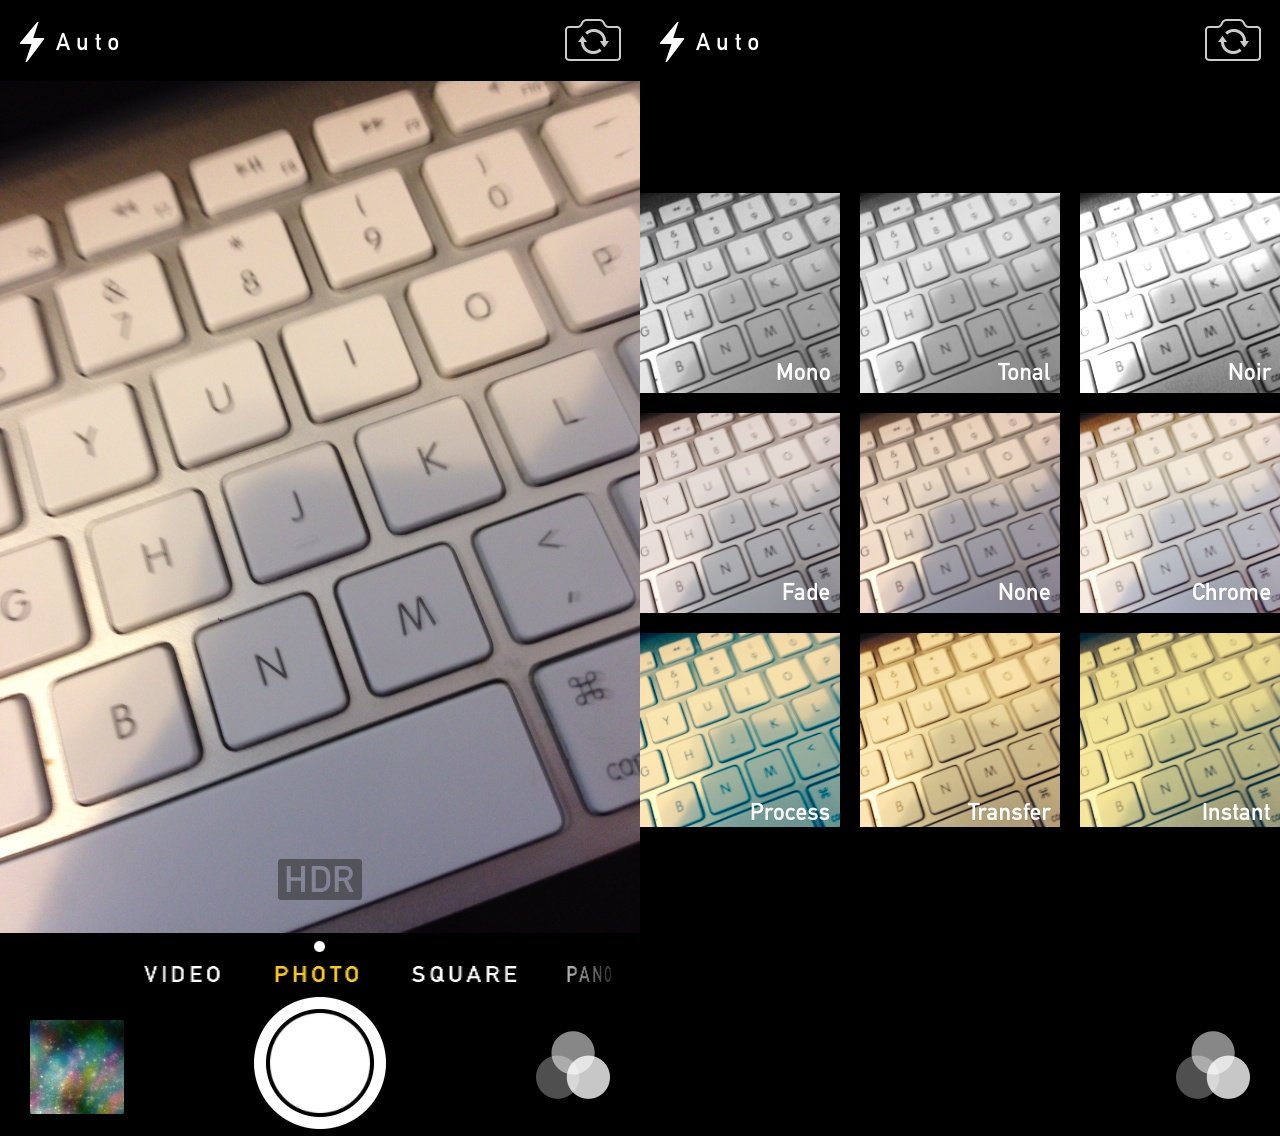 The iOS 7 camera app is new, with a few new tricks and a new look.